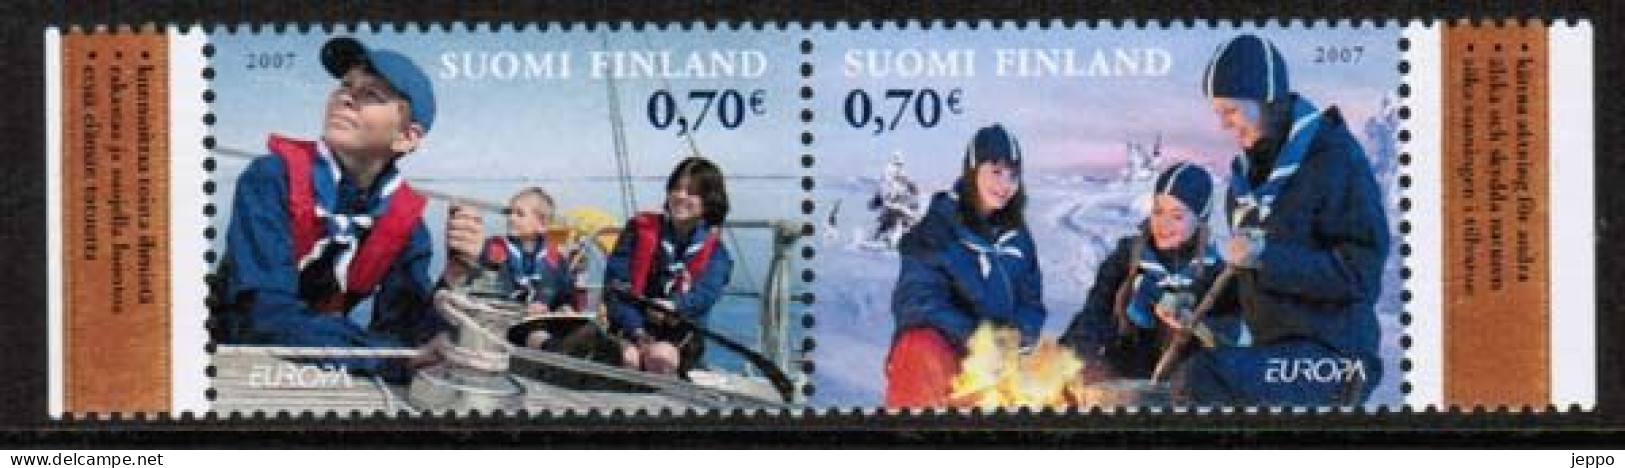 2007 Finland, Europa Cept Pair MNH. - Unused Stamps